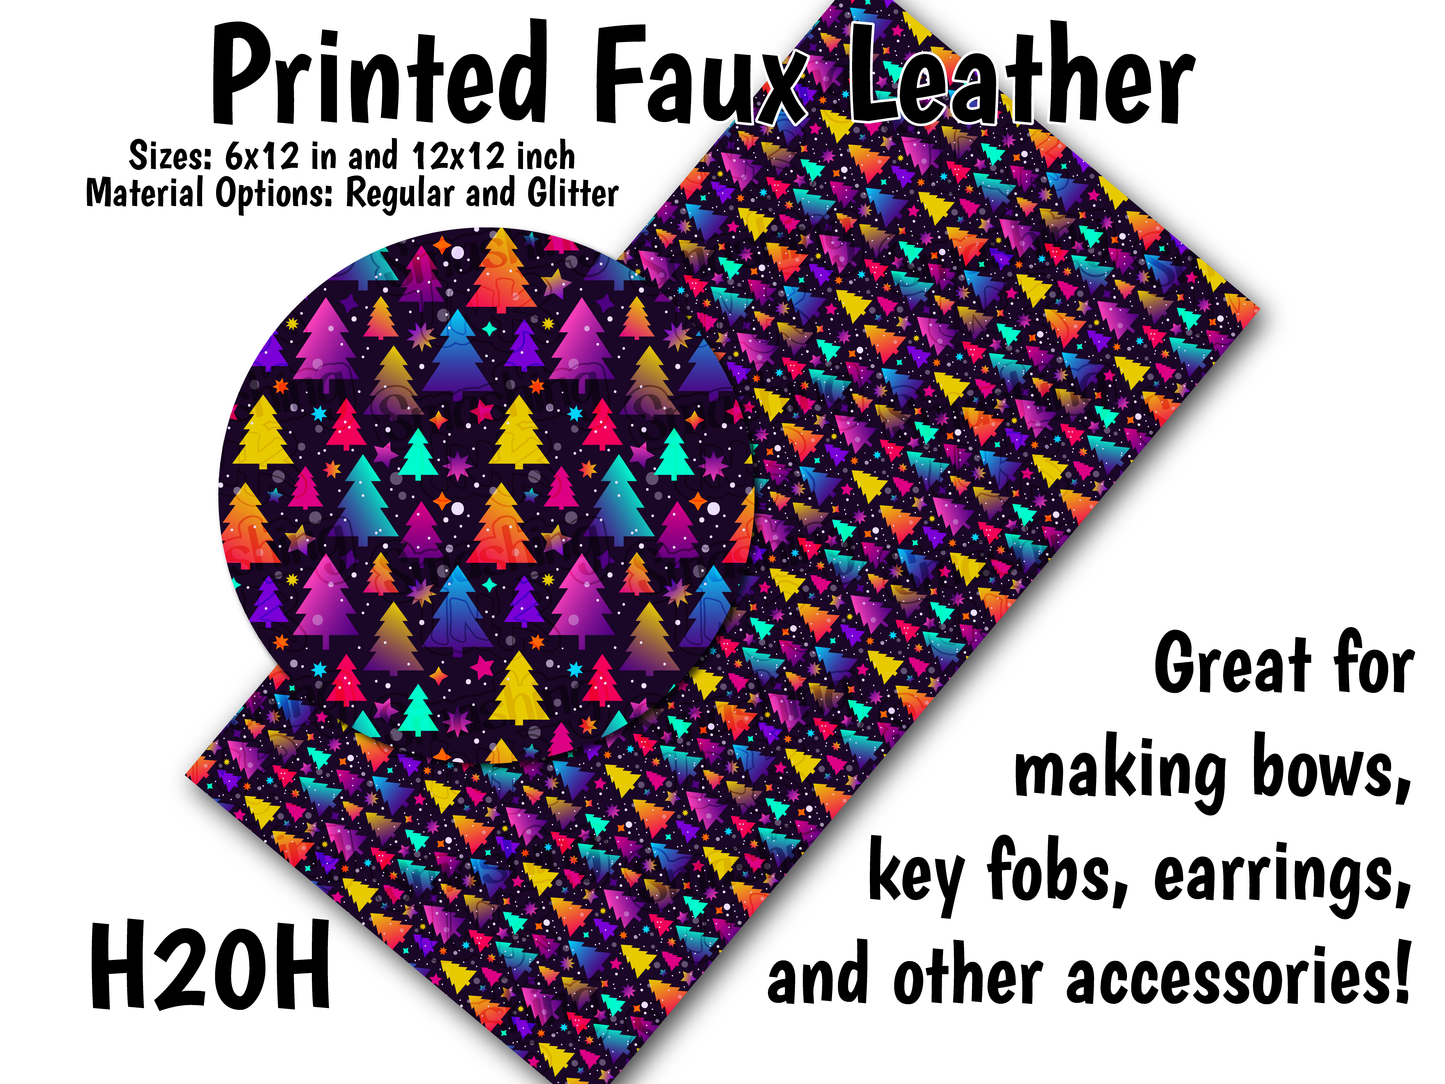 Colorful Christmas Trees - Faux Leather Sheet (SHIPS IN 3 BUS DAYS)